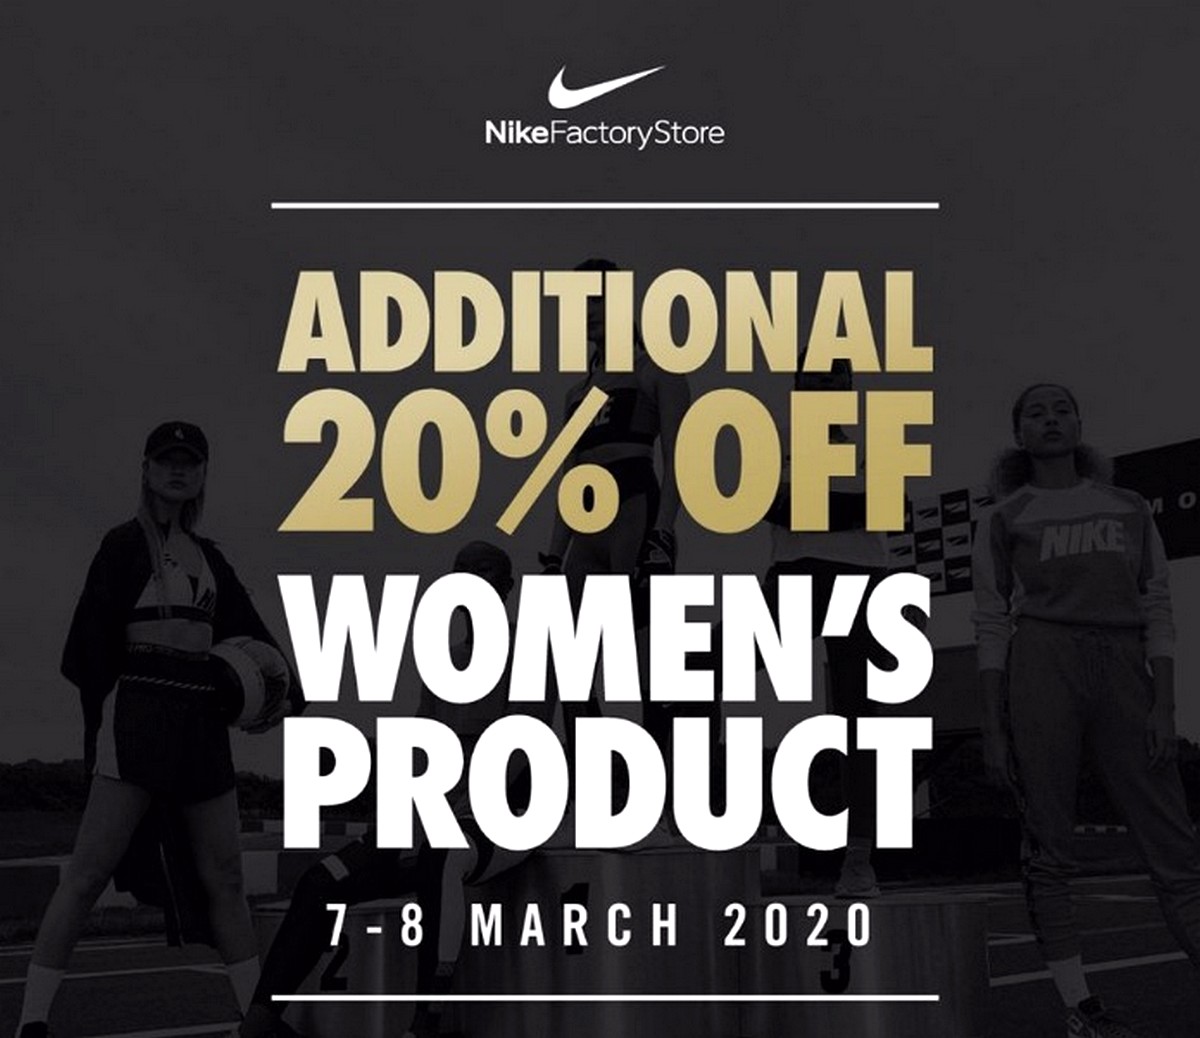 Nike-Factory-Store-Special-Sale-Women-Day-Addtional-Discounts-2020-Malaysia-Warehouse-Sale-Clearance-Jualan-Gudang-Sports-Sukan-2021-001 - Apparels Bicycles Fashion Accessories Fashion Lifestyle & Department Store Fitness Footwear Golf Johor Kuala Lumpur Melaka Nationwide Outdoor Sports Pahang Selangor Sports,Leisure & Travel Sportswear Swimwear Warehouse Sale & Clearance in Malaysia 